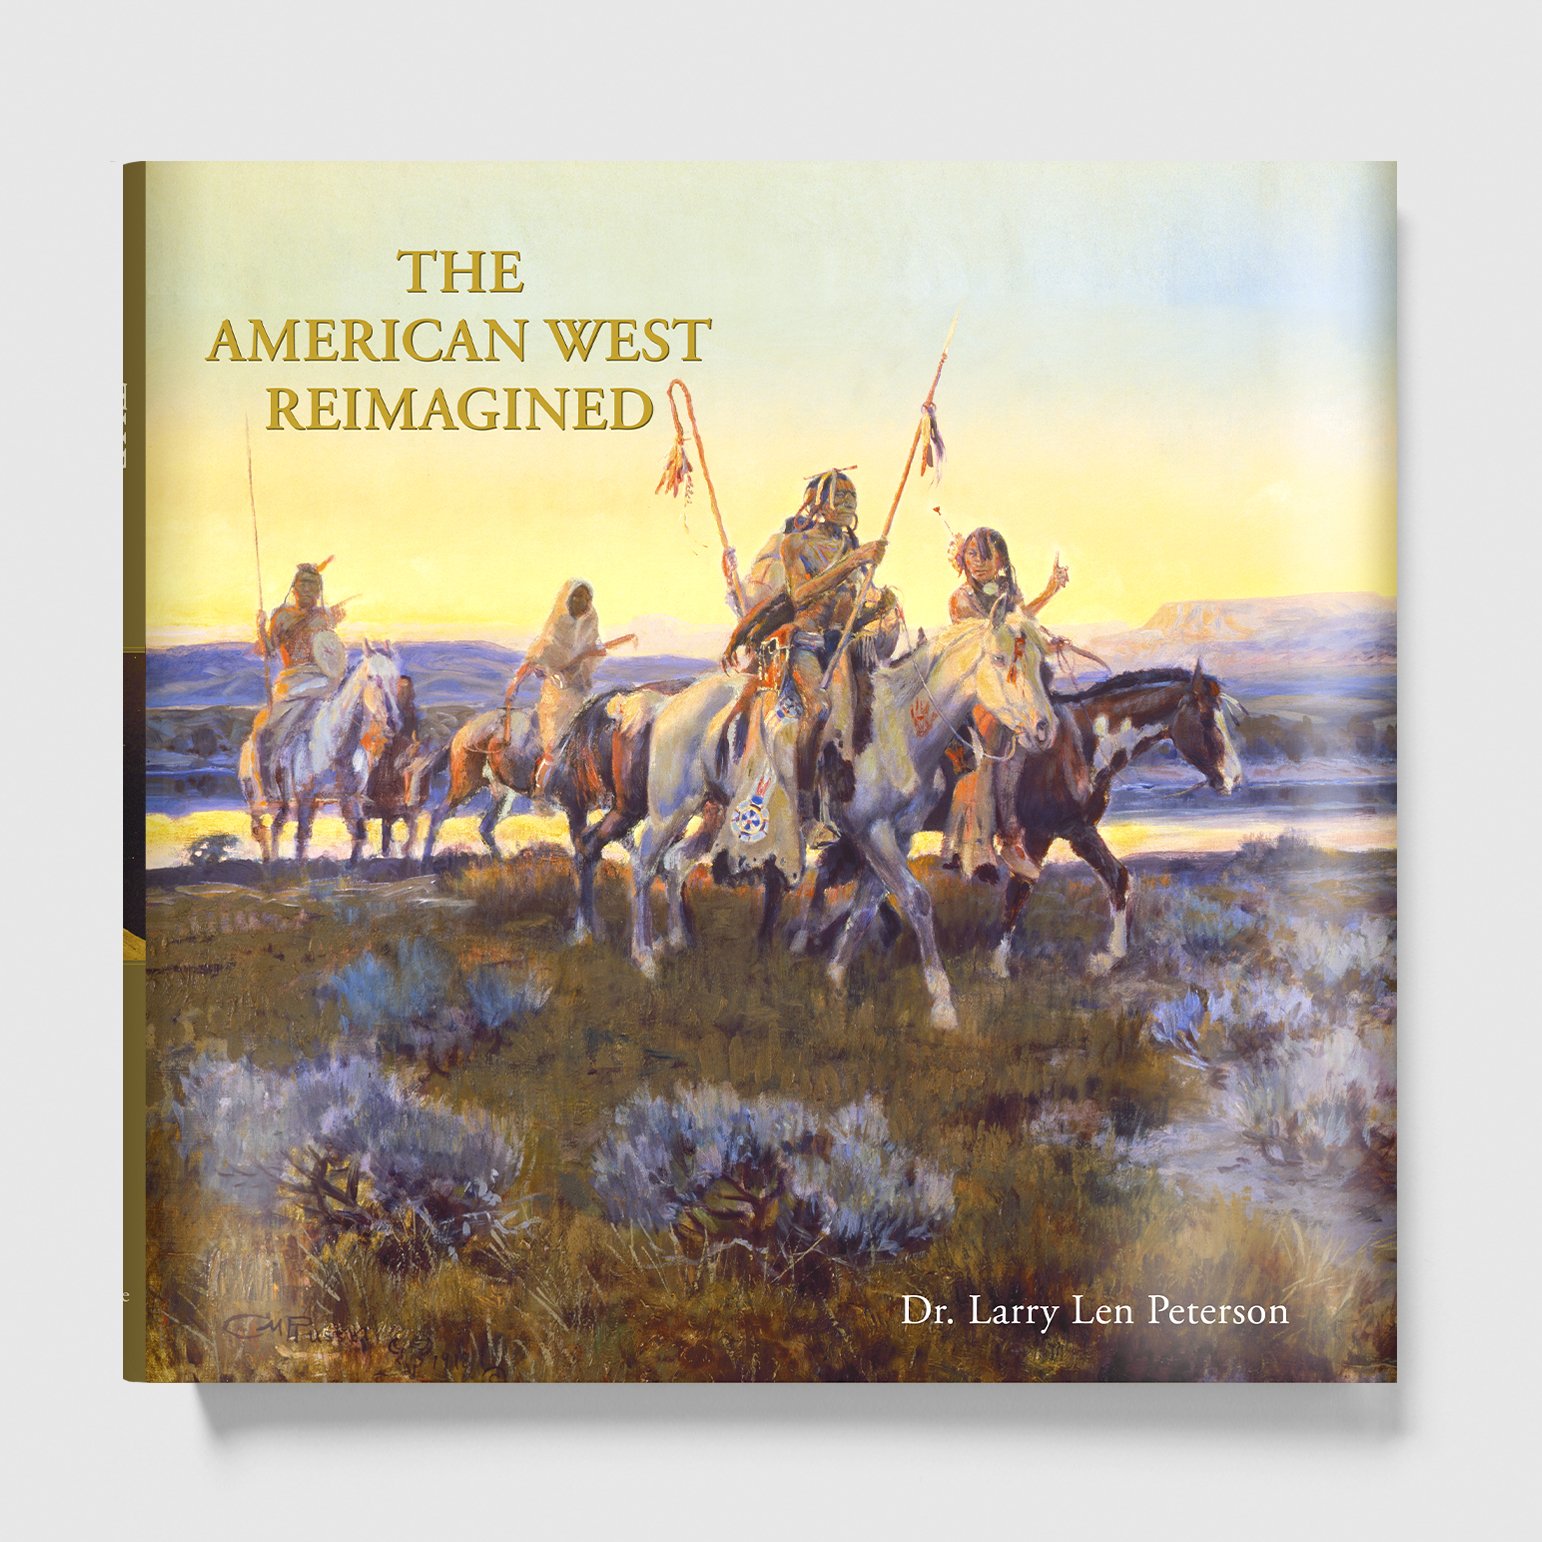 The American West Reimagined